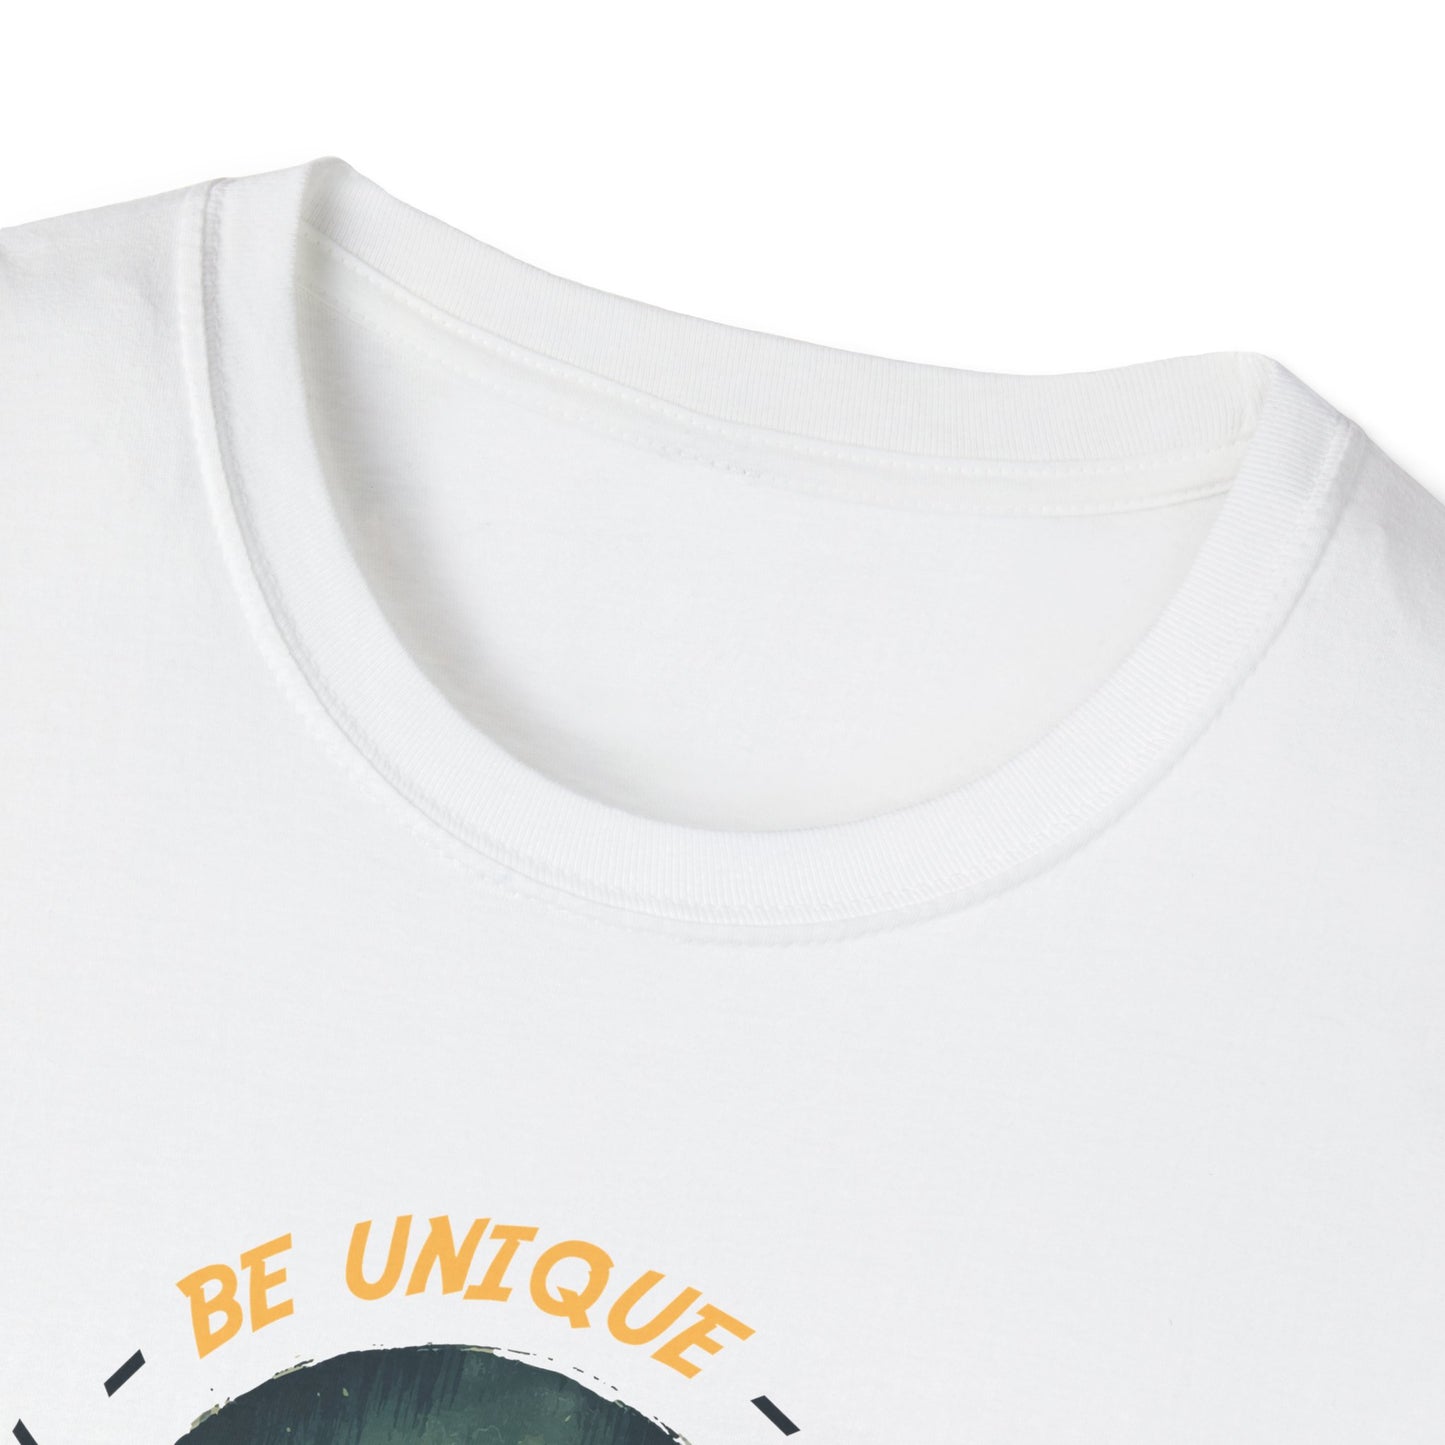 Be Still - Be Unique - Be Blissful Unisex Softstyle T-Shirt